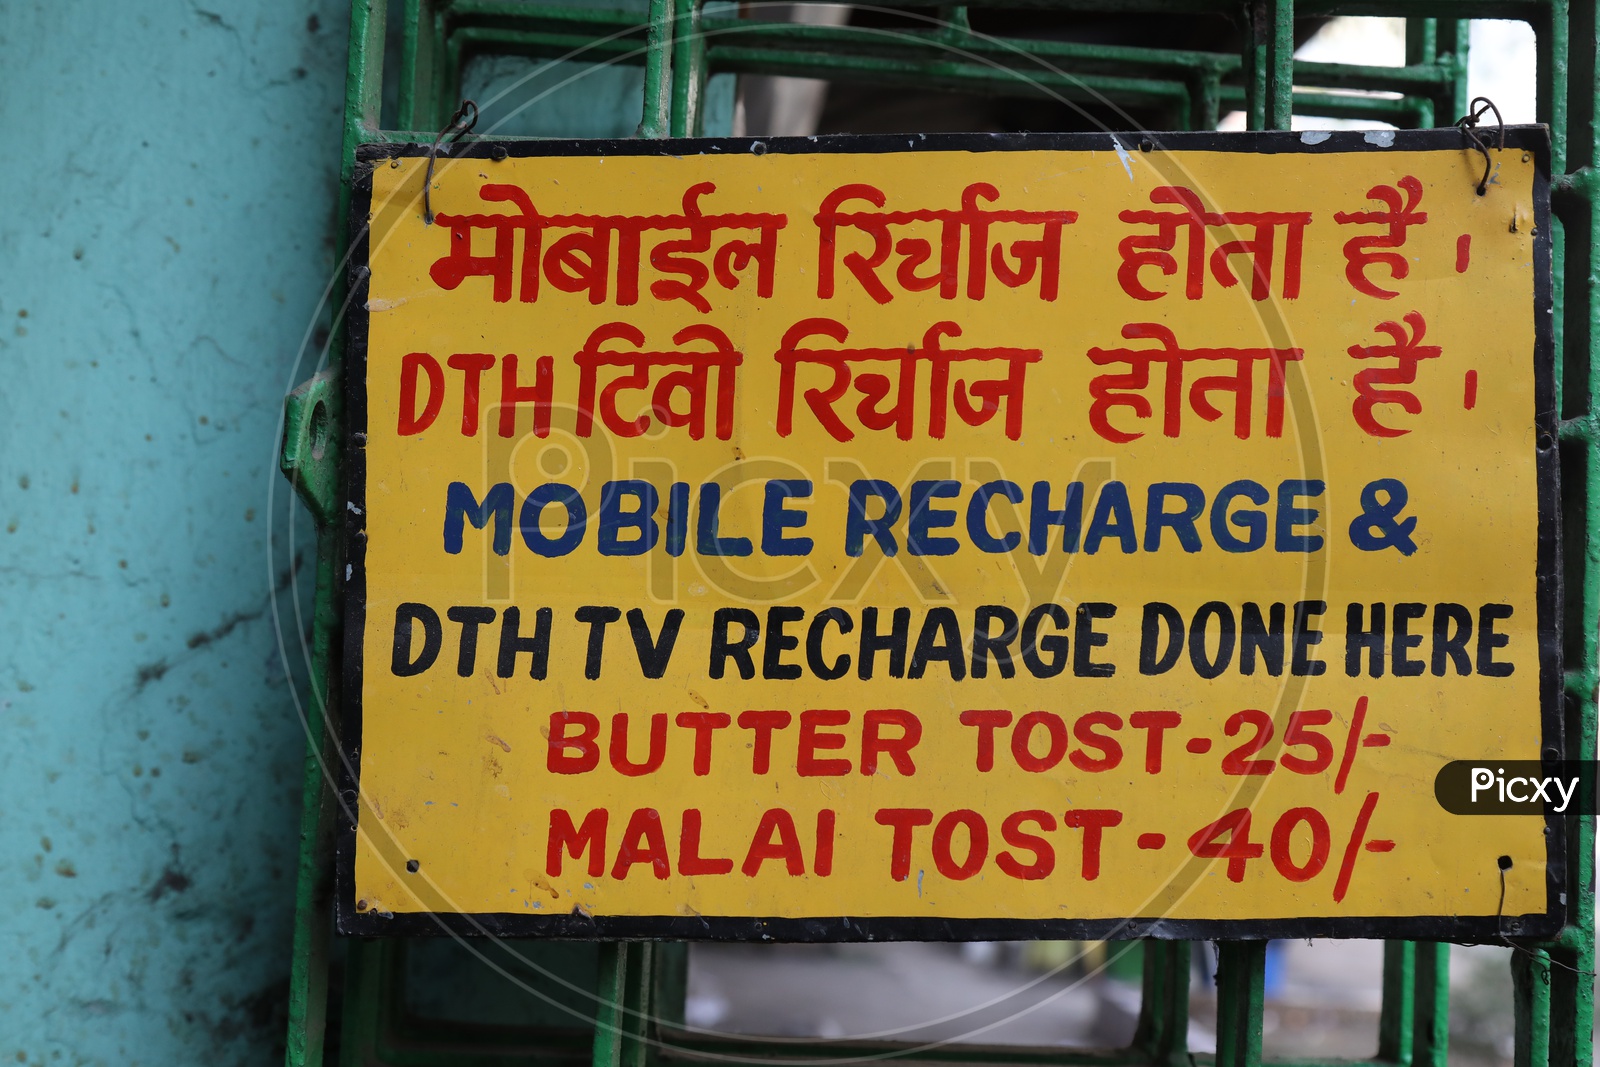 Name Boards Saying Mobile And DTH Recharge Available